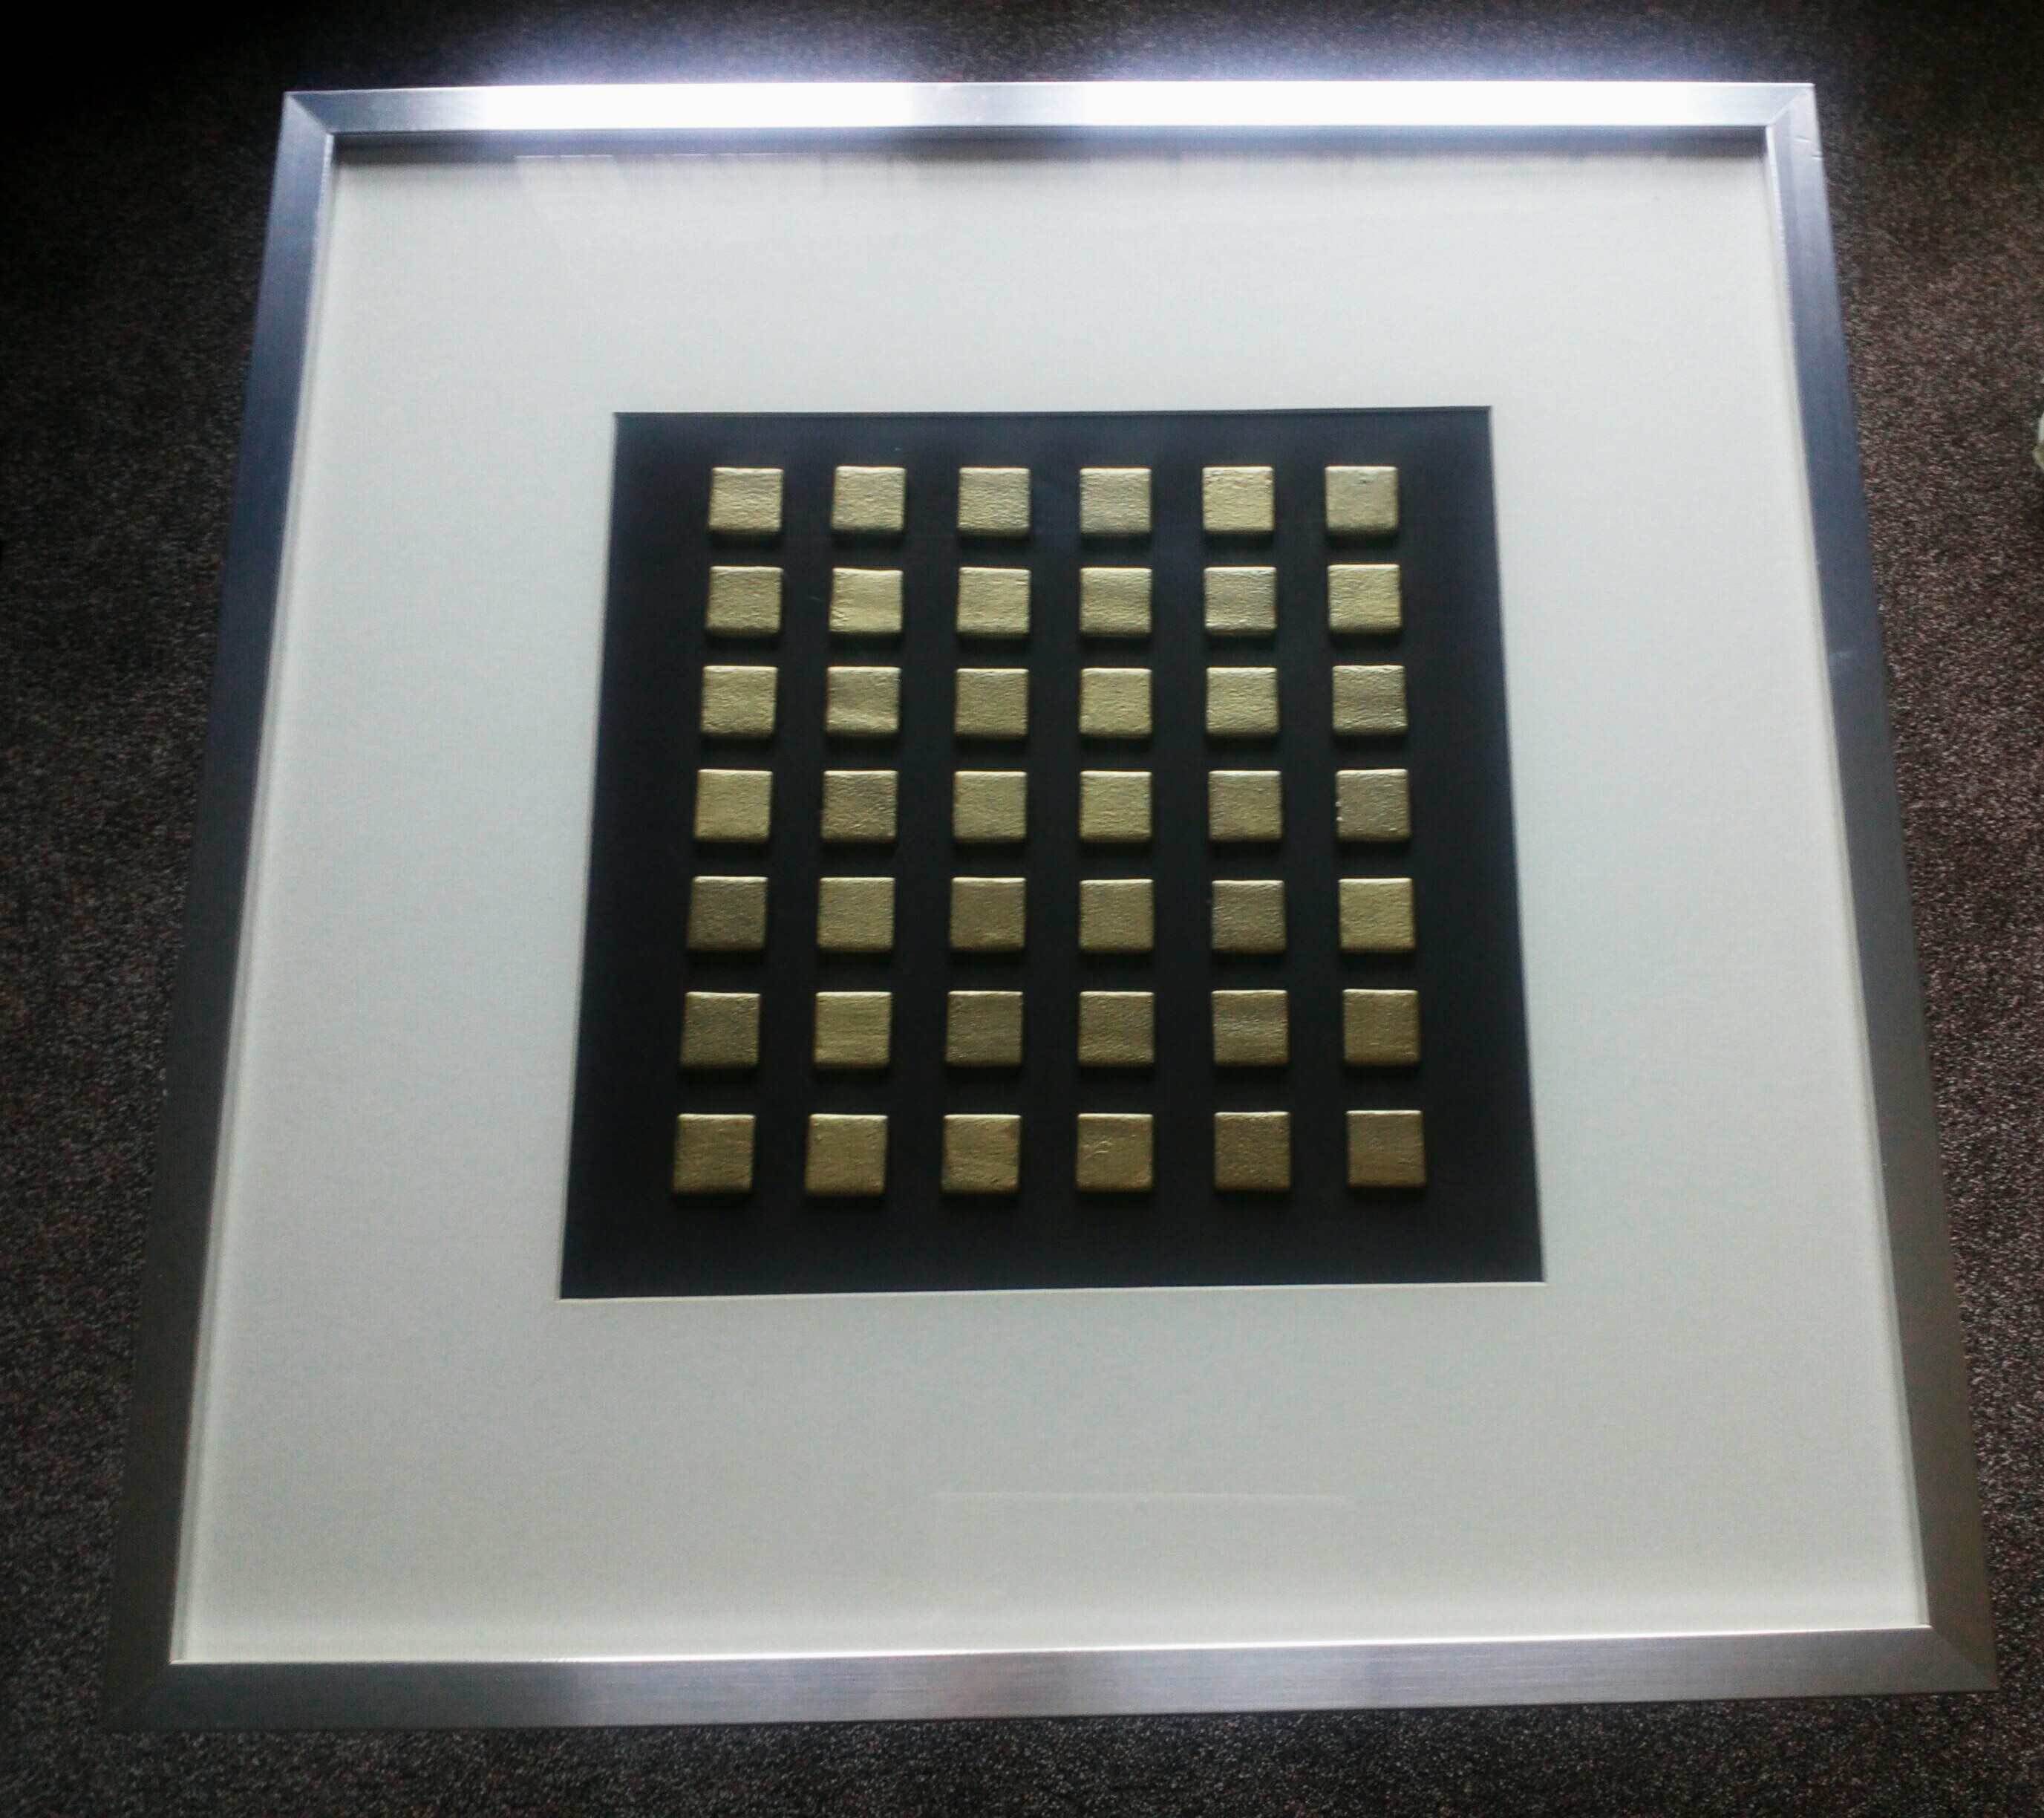 Gold glass tiles mounted on board. Brushed aluminium frame.